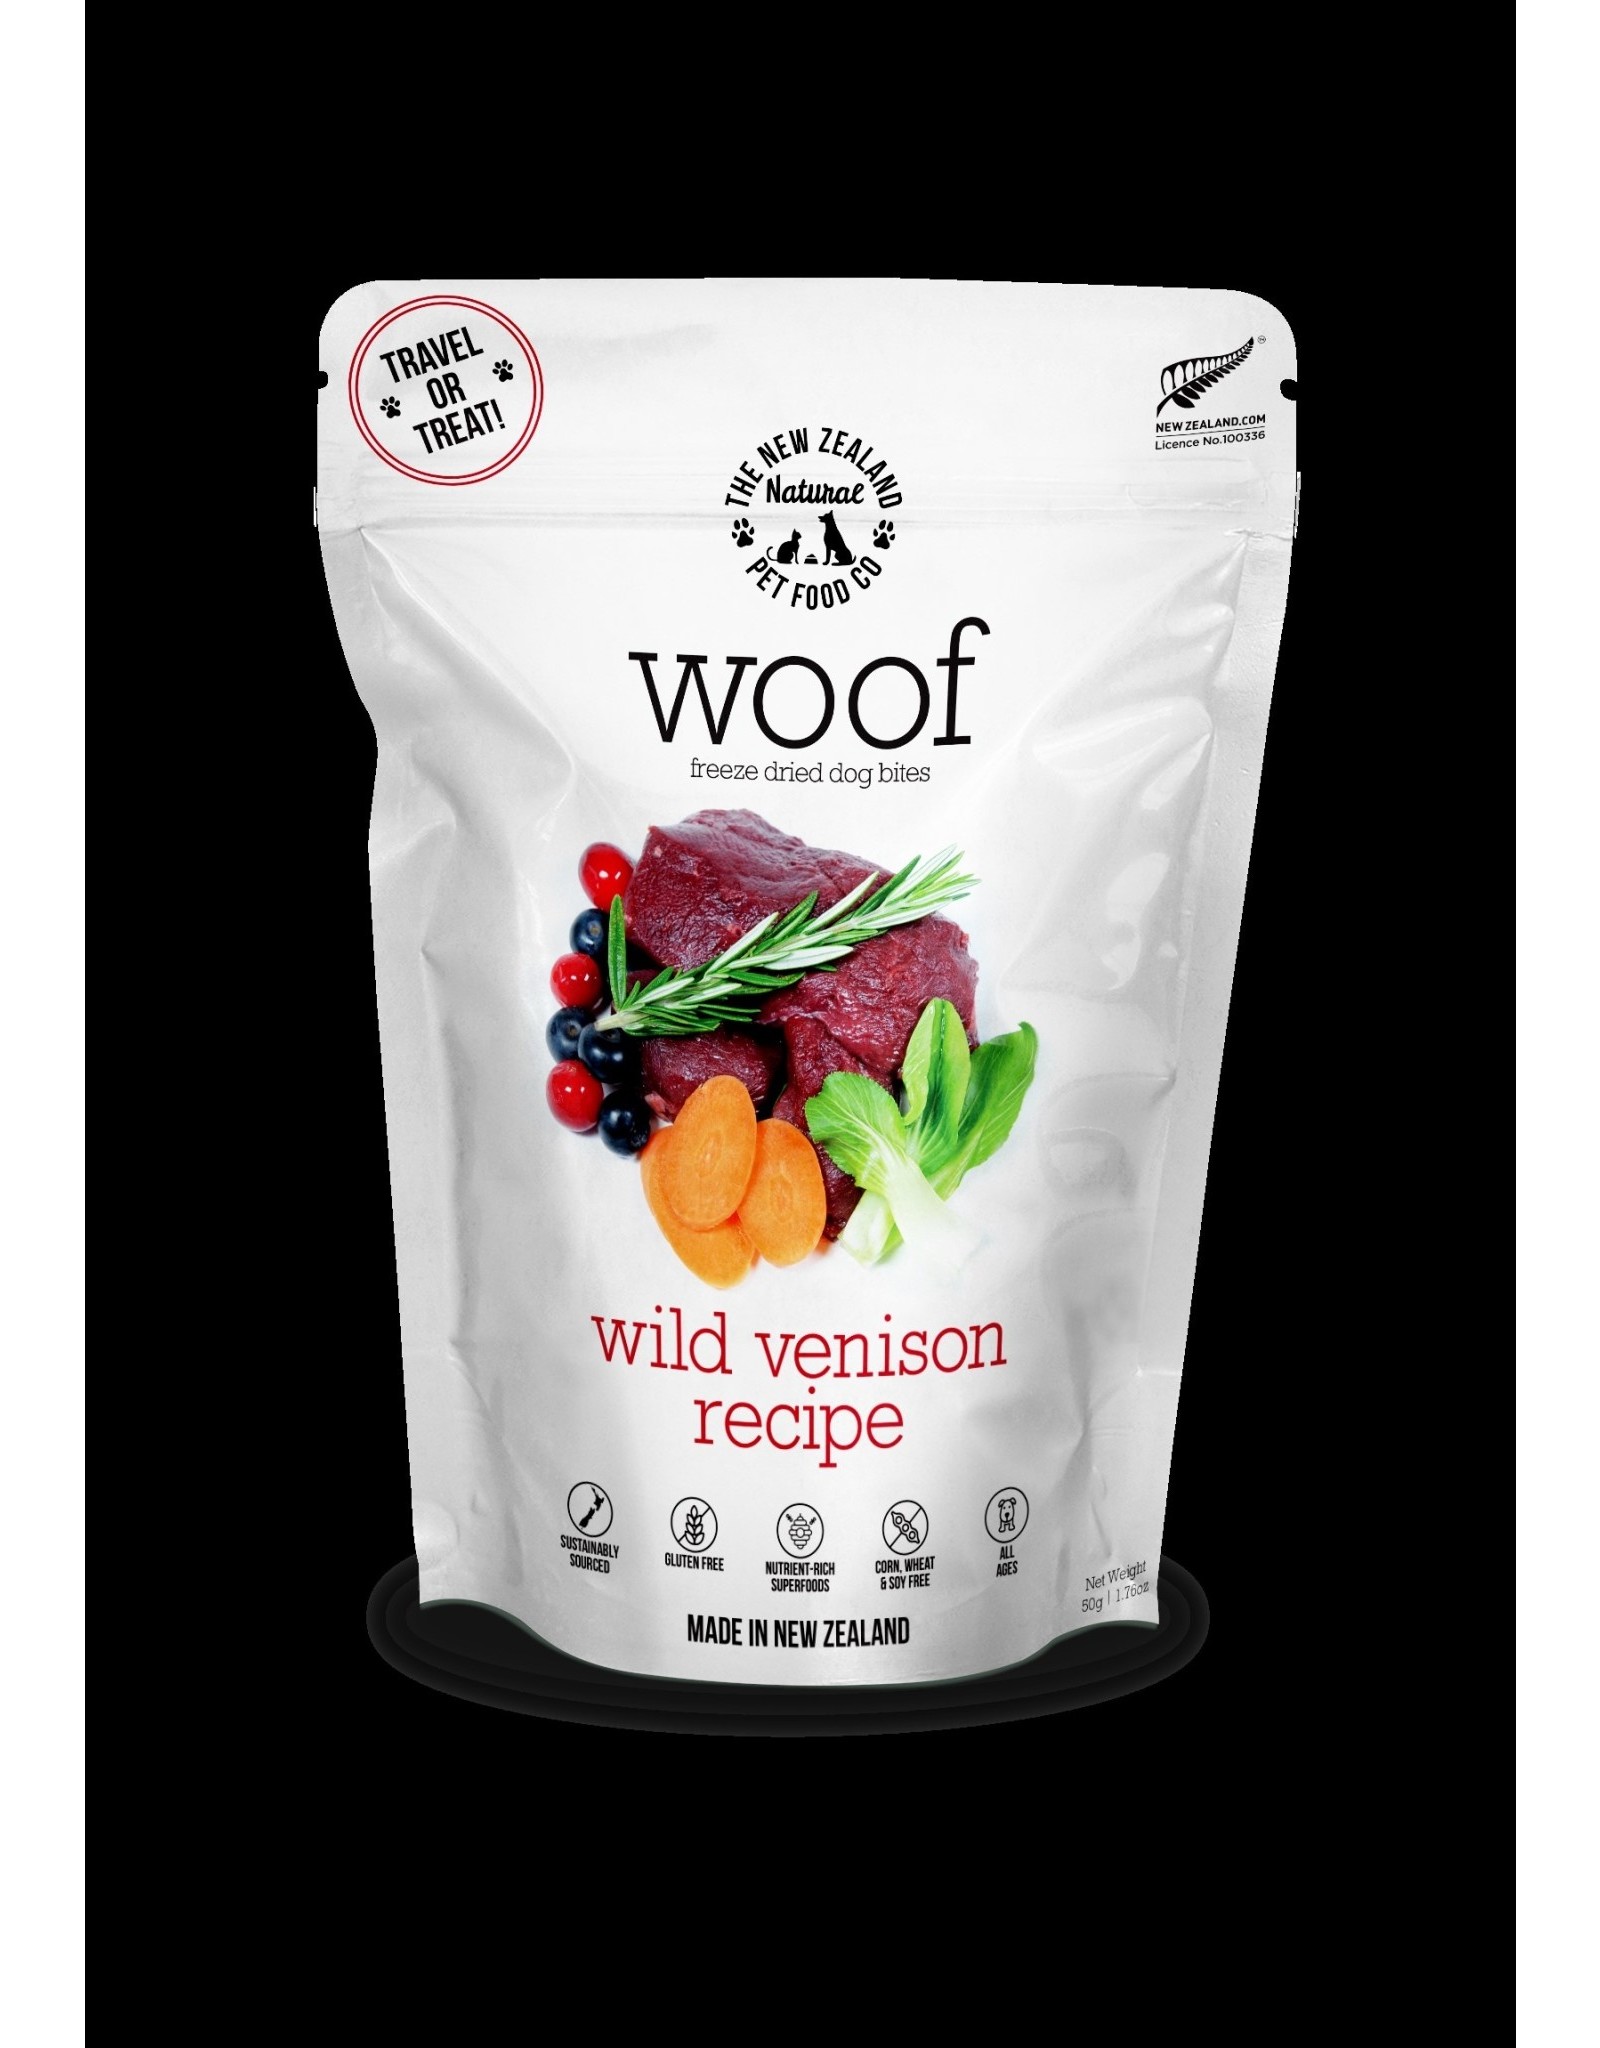 THE NEW ZEALAND NATURAL PETFOOD CO- WOOF NEW ZEALAND DOG WOOF FREEZE DRIED VENISON MORSELS